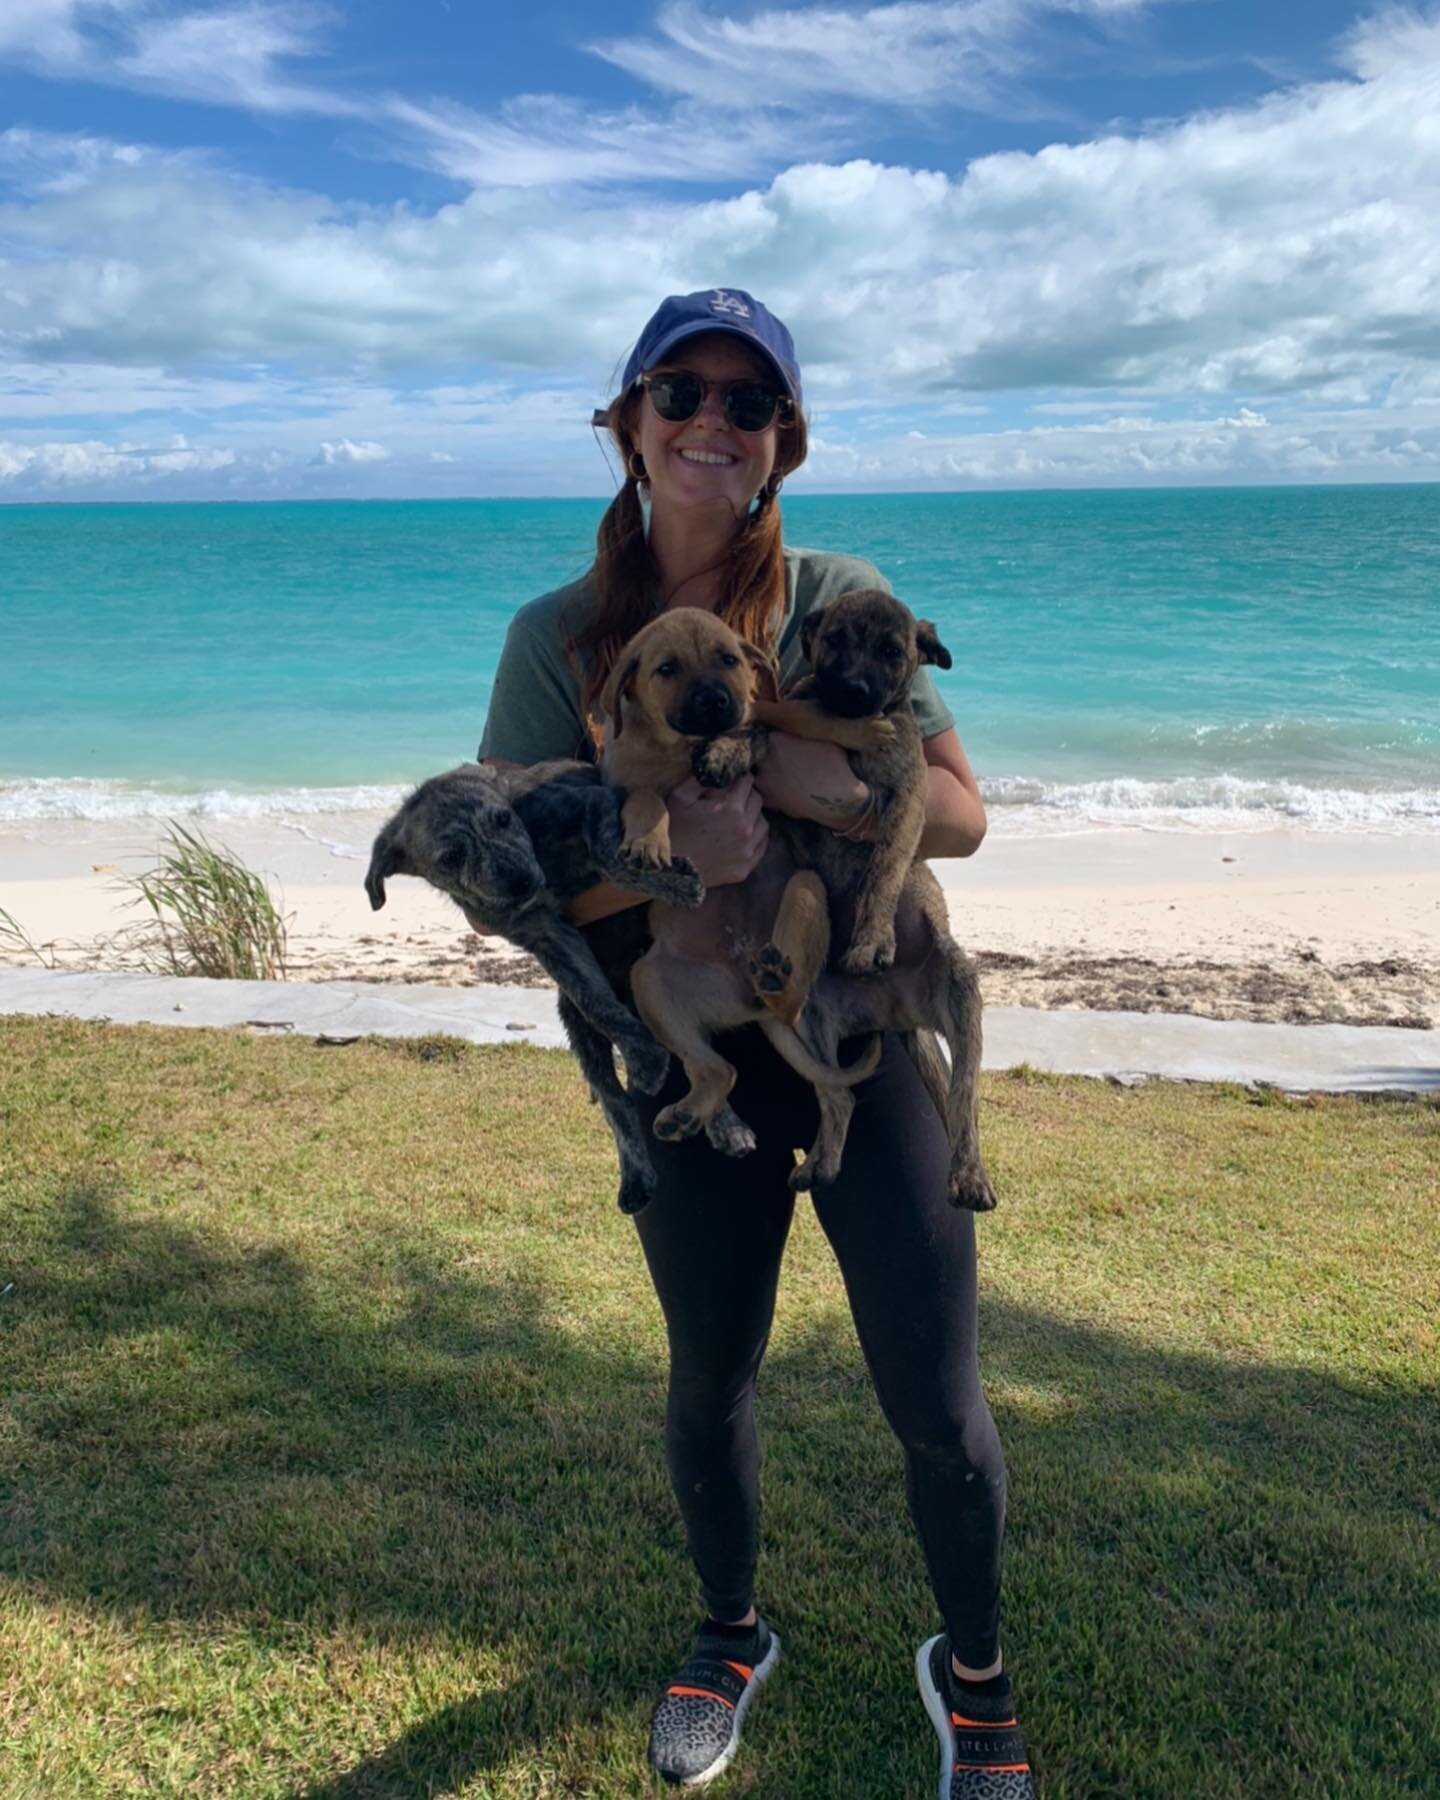 💫🇧🇸🐾 Yappy Independence Day to you, Bahamas! 💫🇧🇸🐾
 
We are grateful to have met and had the helping paws of so many who love your country and want to give back to the community as much as you give to all of us. 
.
.
.
.
#bahamas #bahamianinde